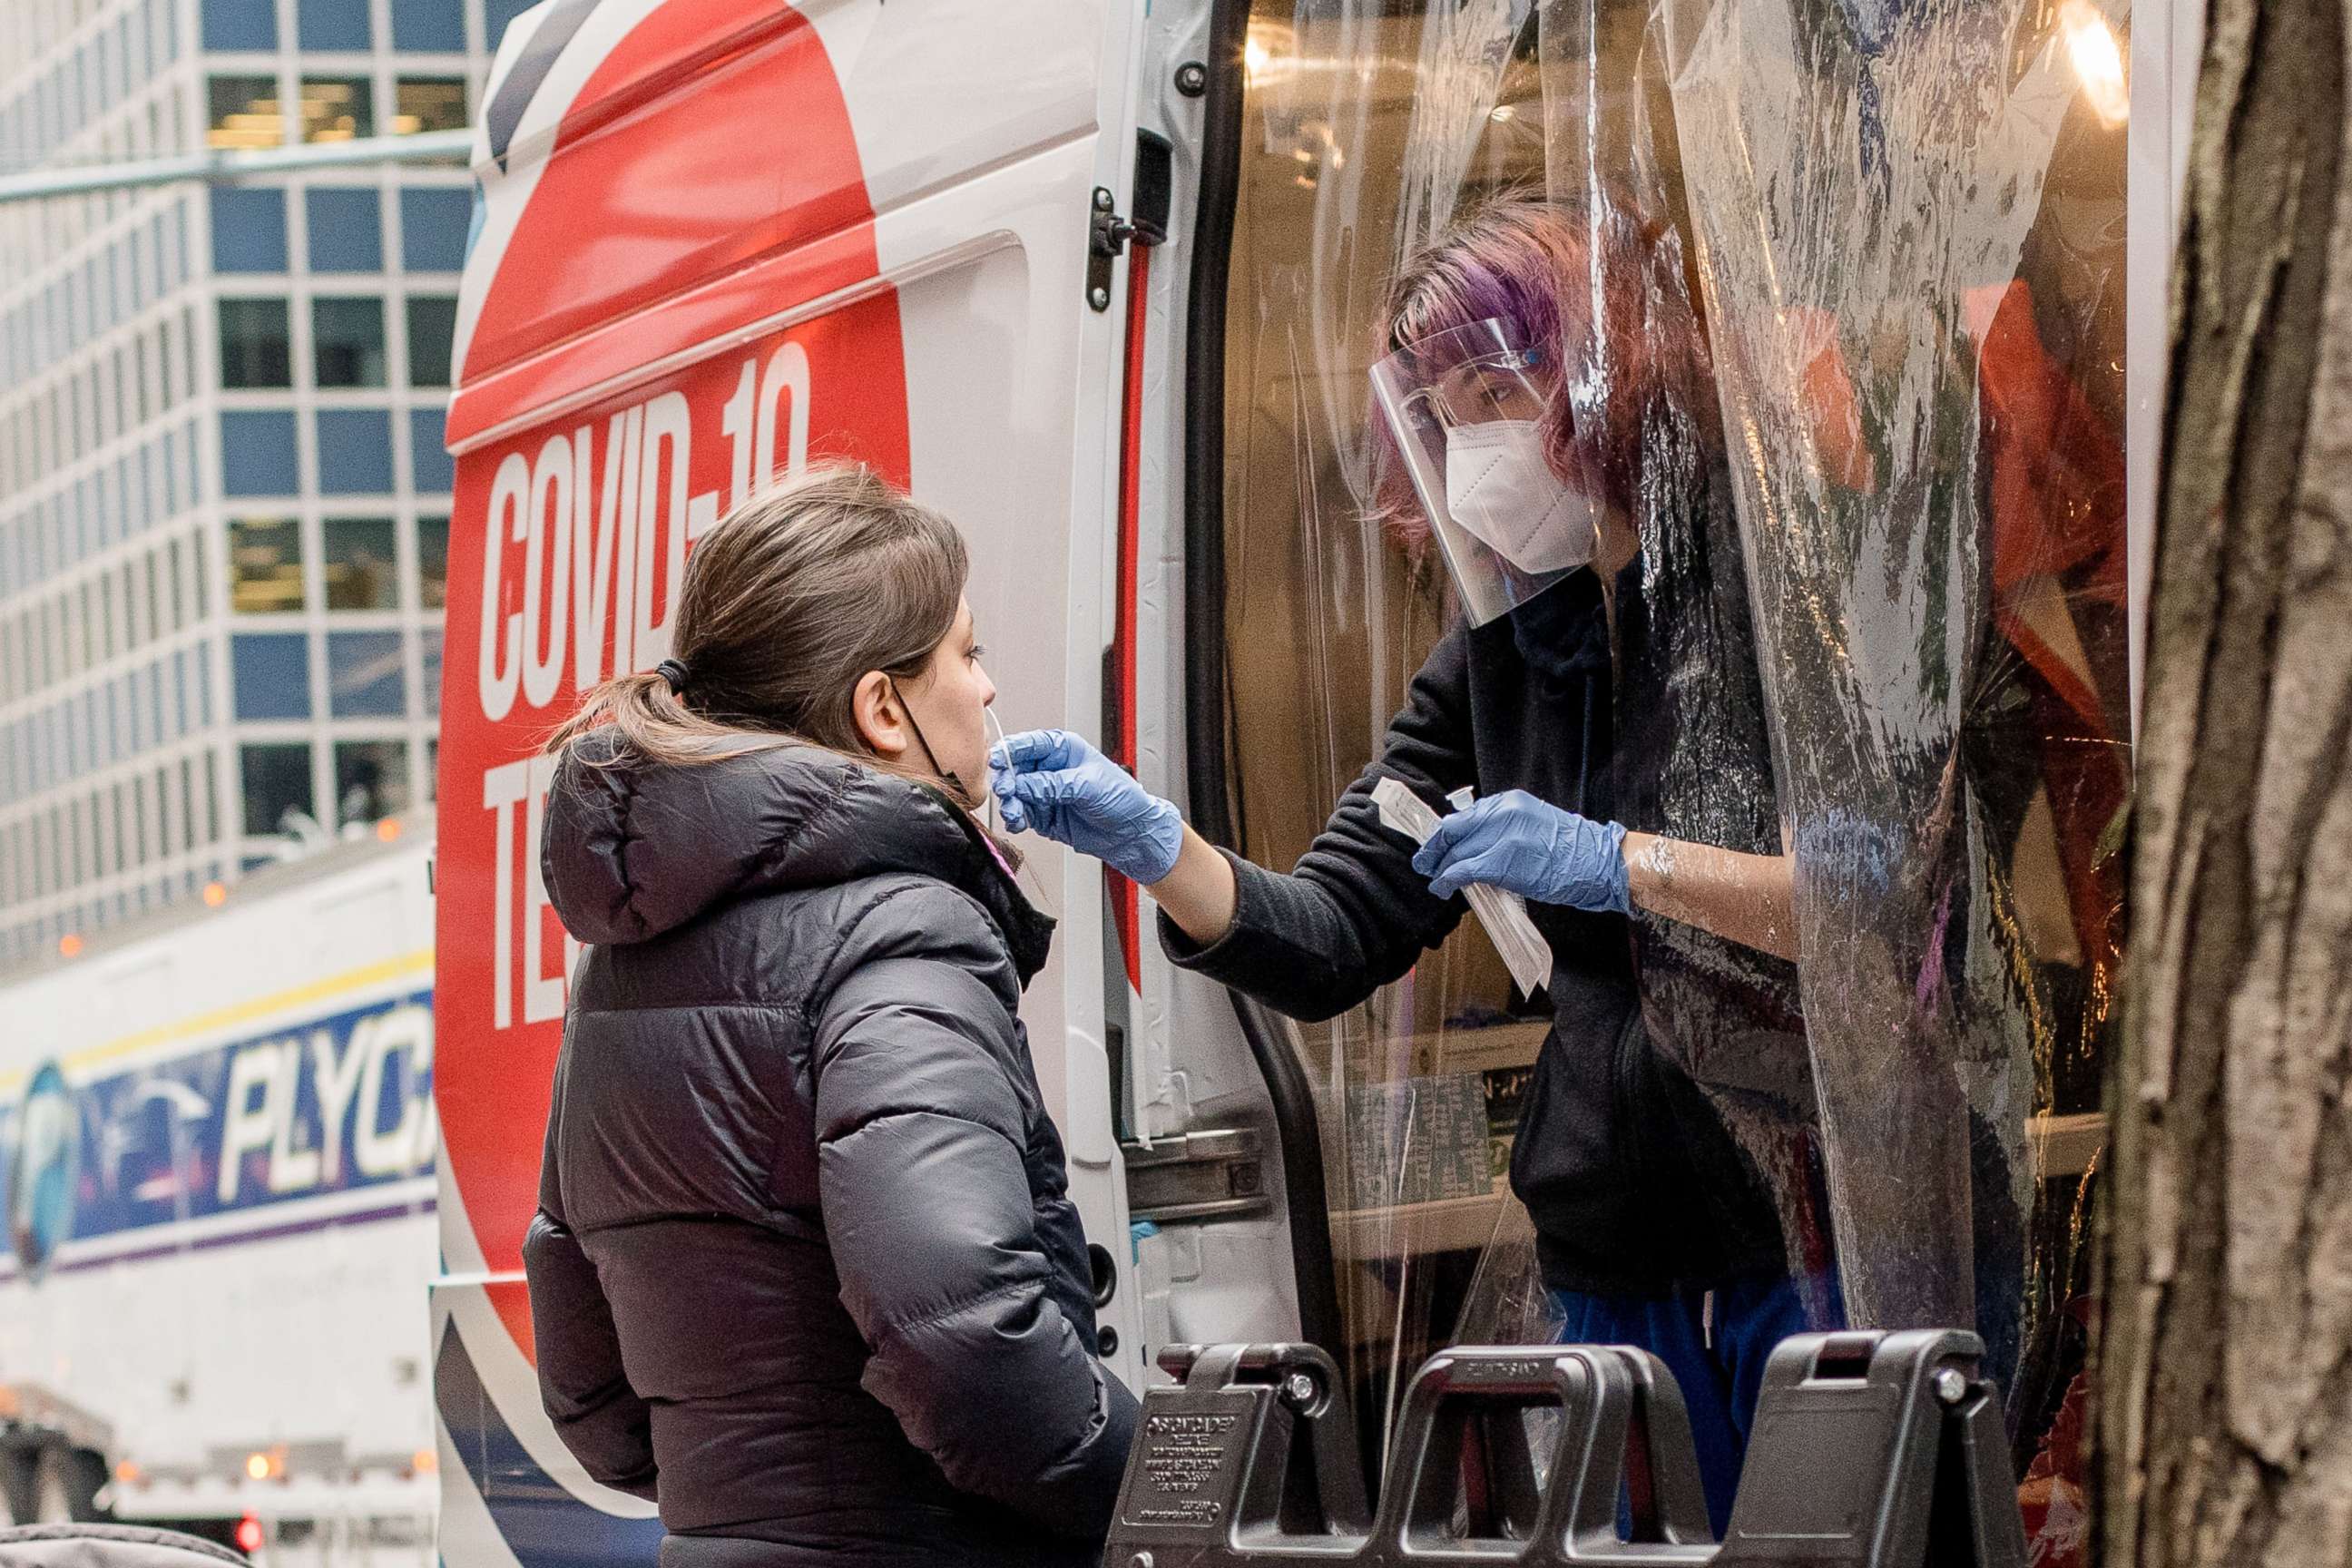 PHOTO: A health worker collects a swab sample from a person for COVID-19 testing at a mobile COVID-19 testing site in New York, Dec. 27, 2021.